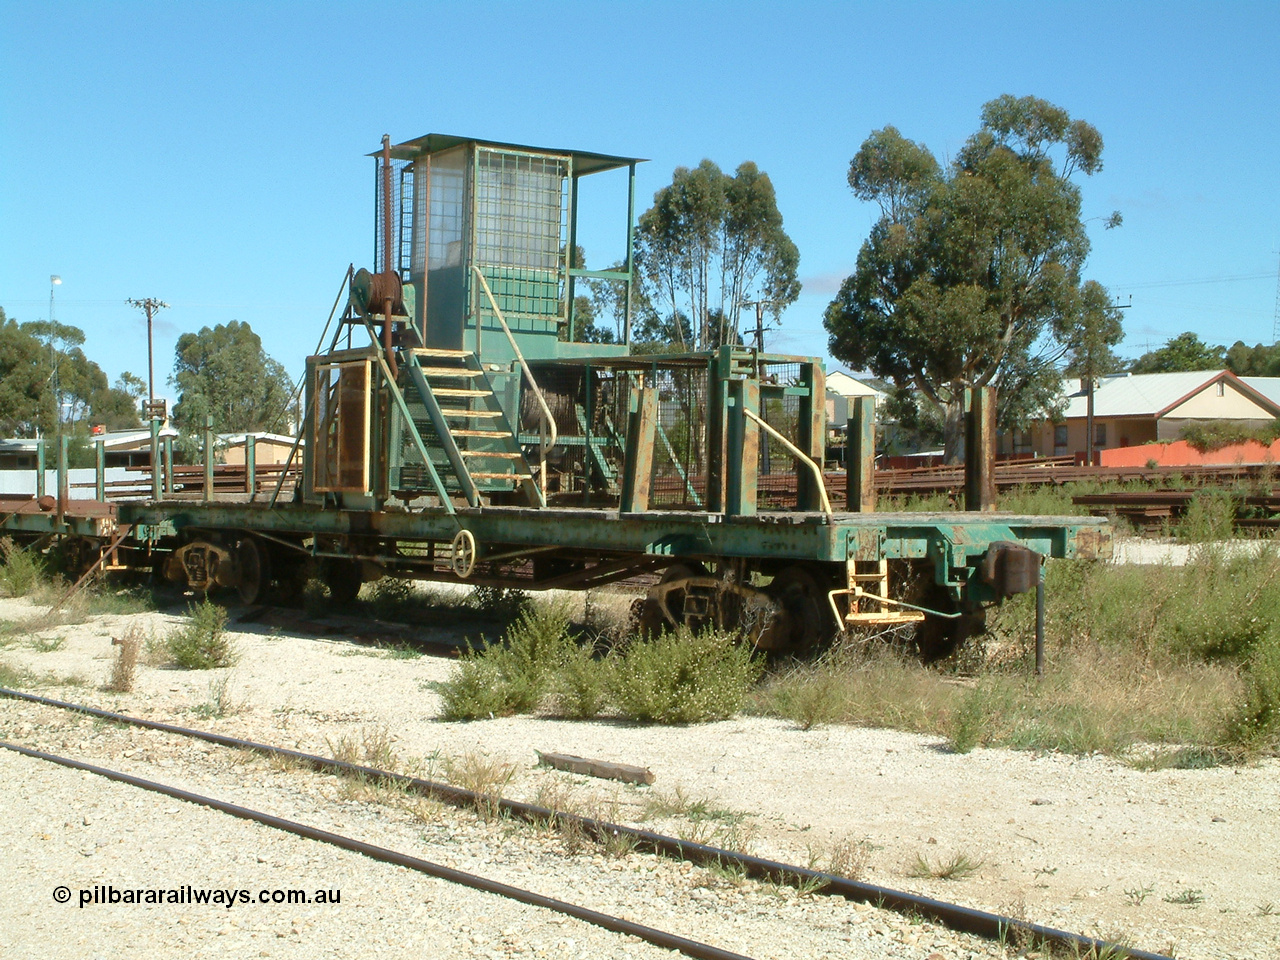 030411 105925
Kimba, rail recovery winch waggon EZWL 2, built using underframe of broad gauge horse box BH 4331. To Eyre Peninsula 1992, recoded then from AZWL. Scrapped in 2005.
Keywords: EZWL-type;EZWL2;SAR-Islington-WS;BH-type;BH4331;